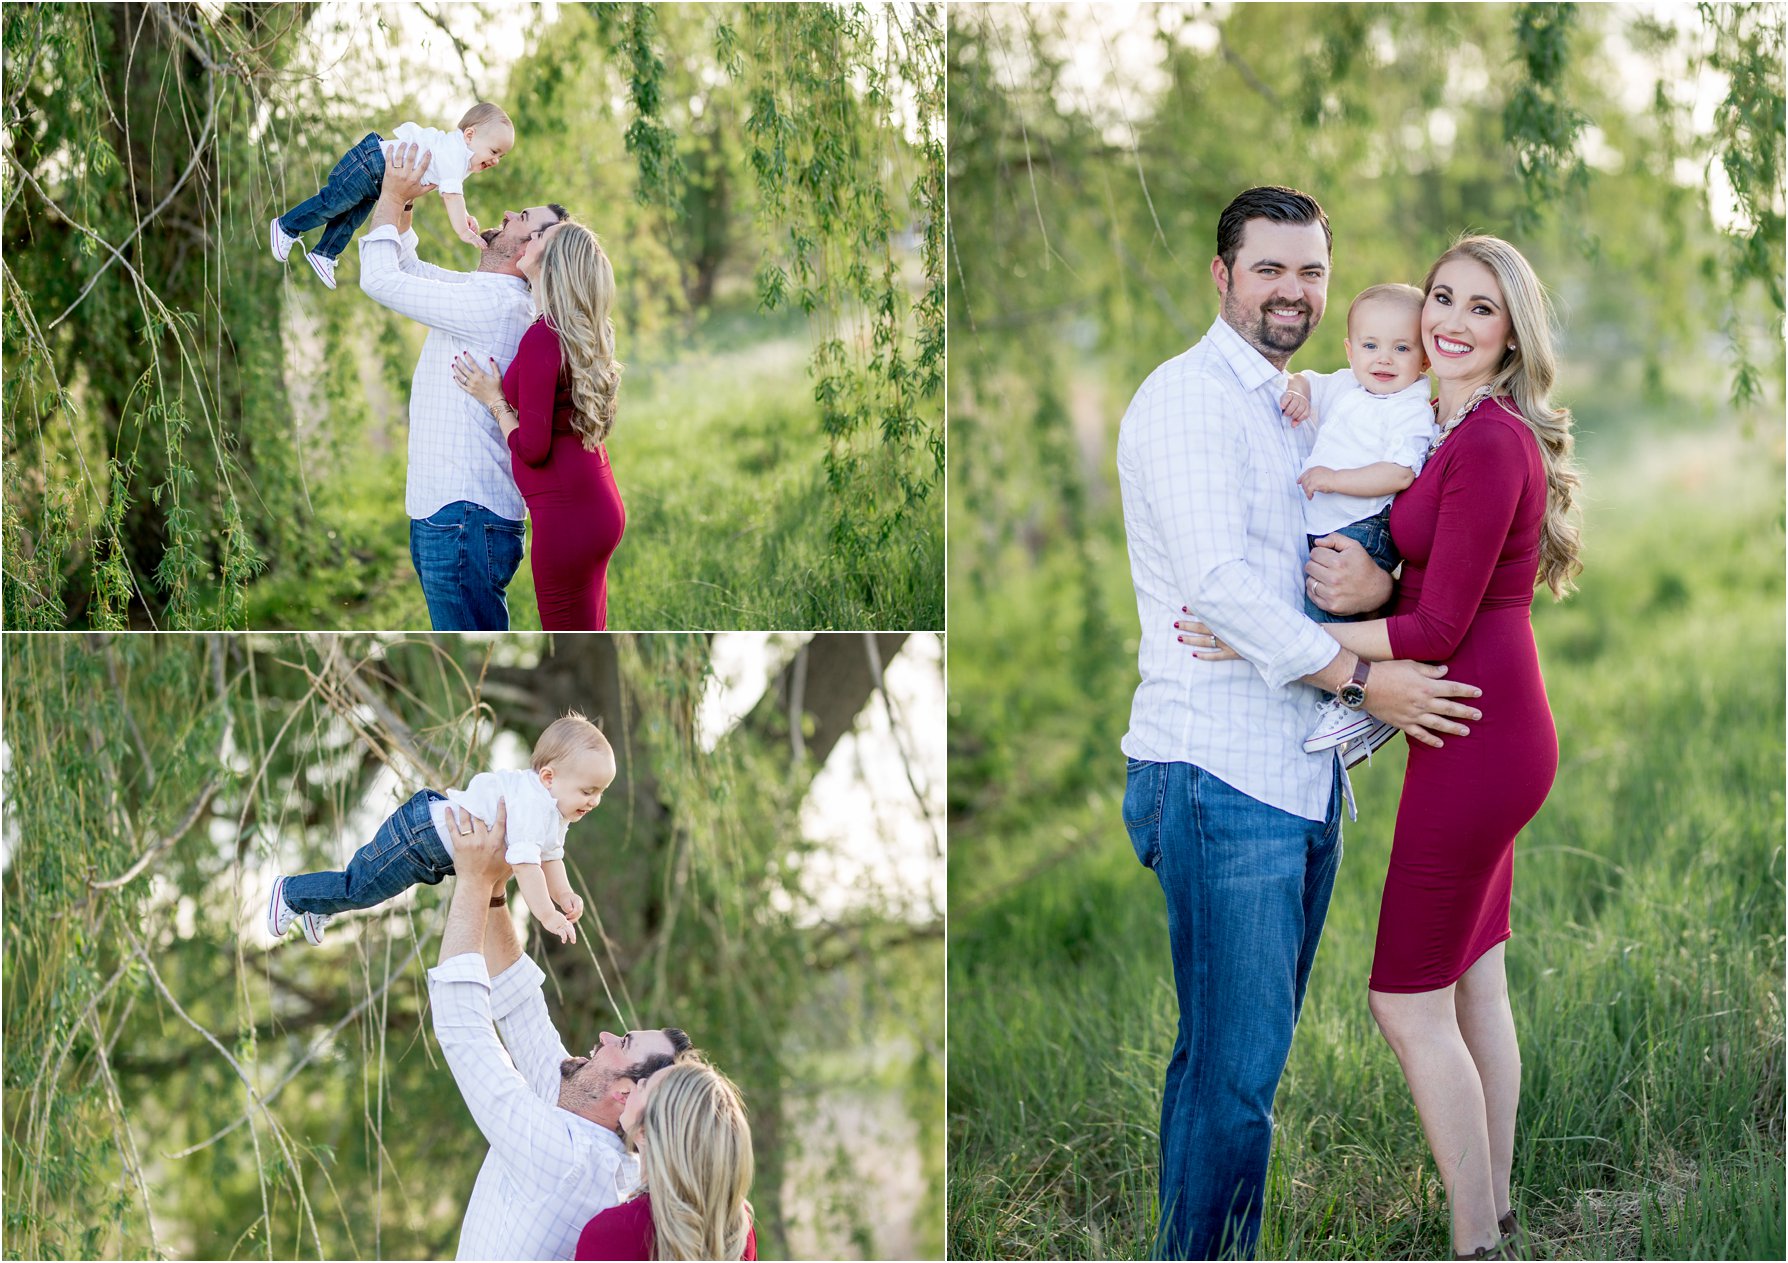 Greeley, Colorado Family and Maternity Session by Northern Colorado Wedding Photographer 